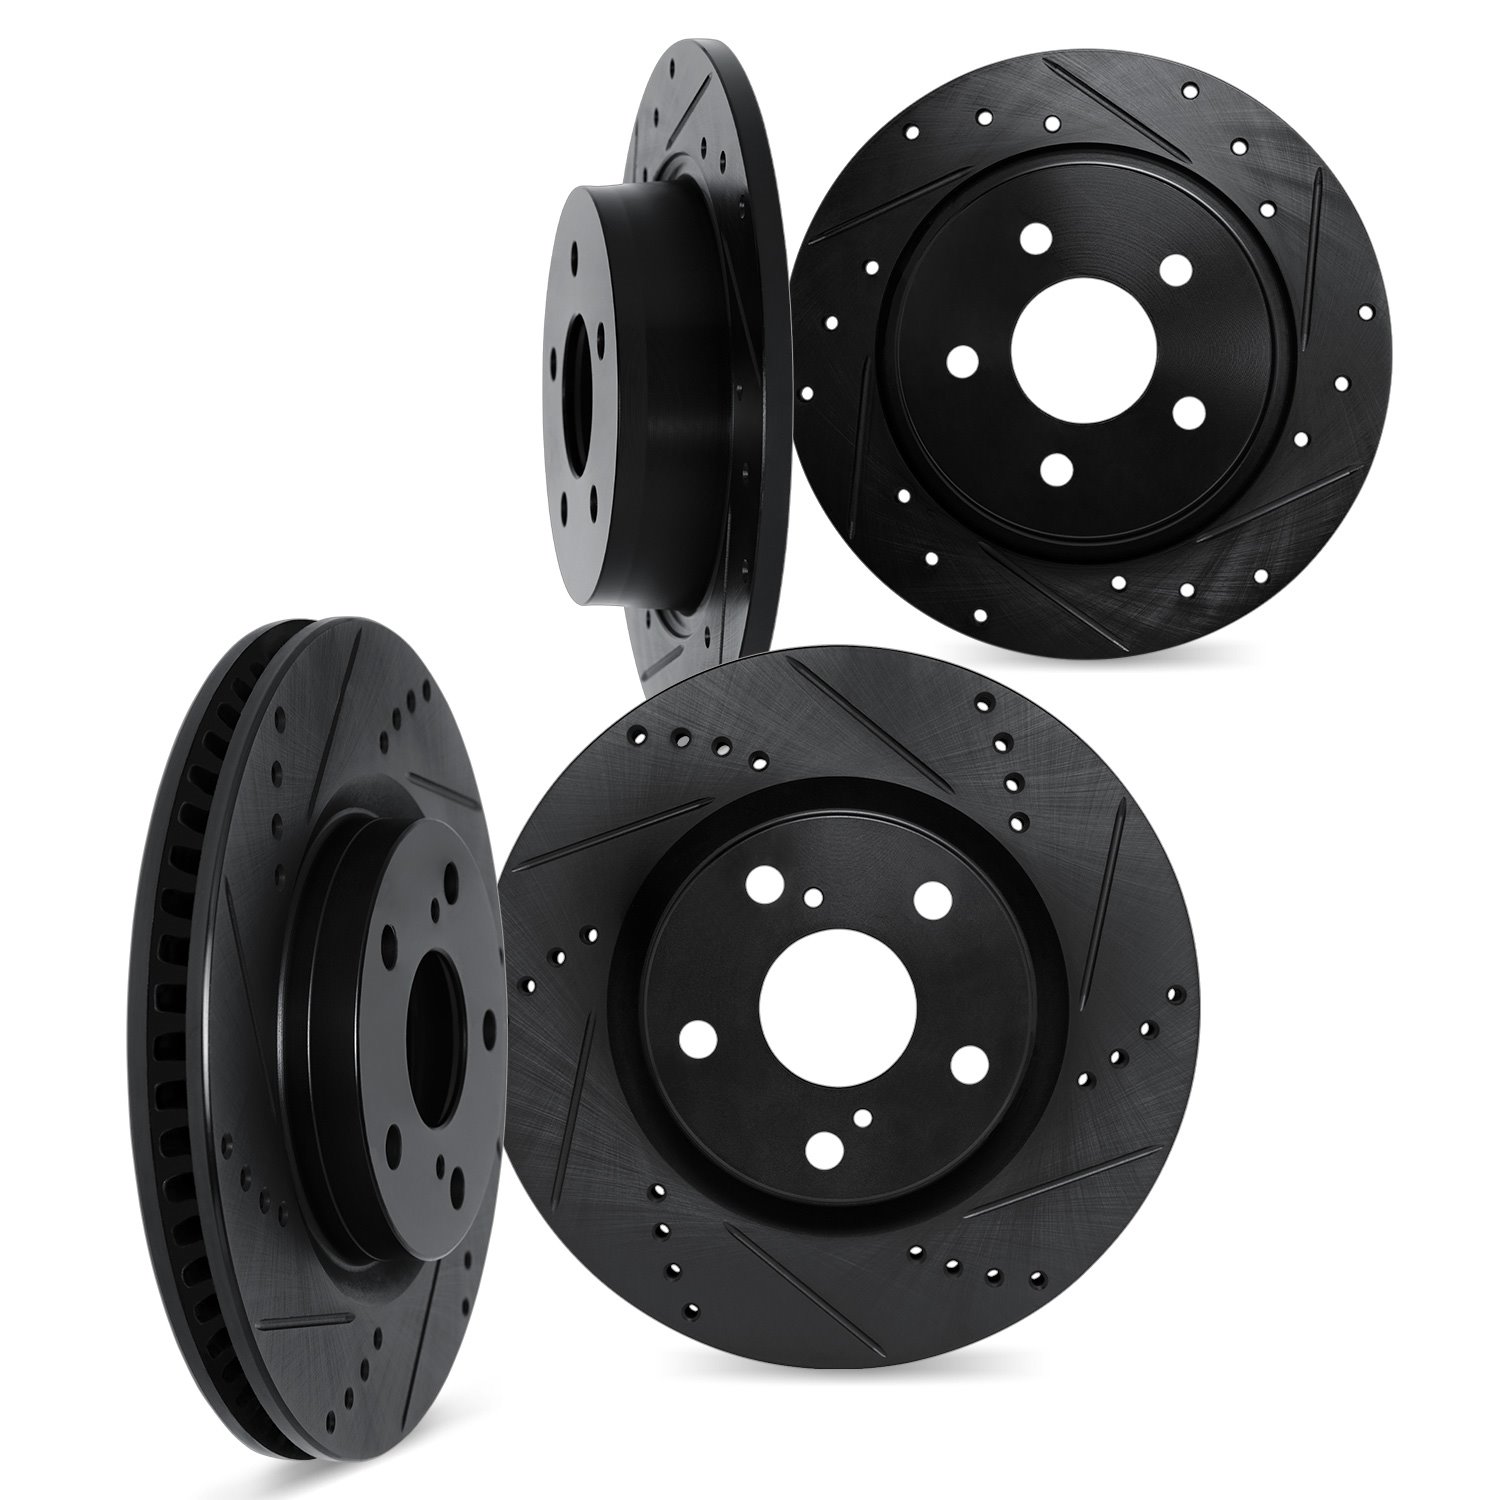 8004-73020 Drilled/Slotted Brake Rotors [Black], 2000-2009 Audi/Volkswagen, Position: Front and Rear